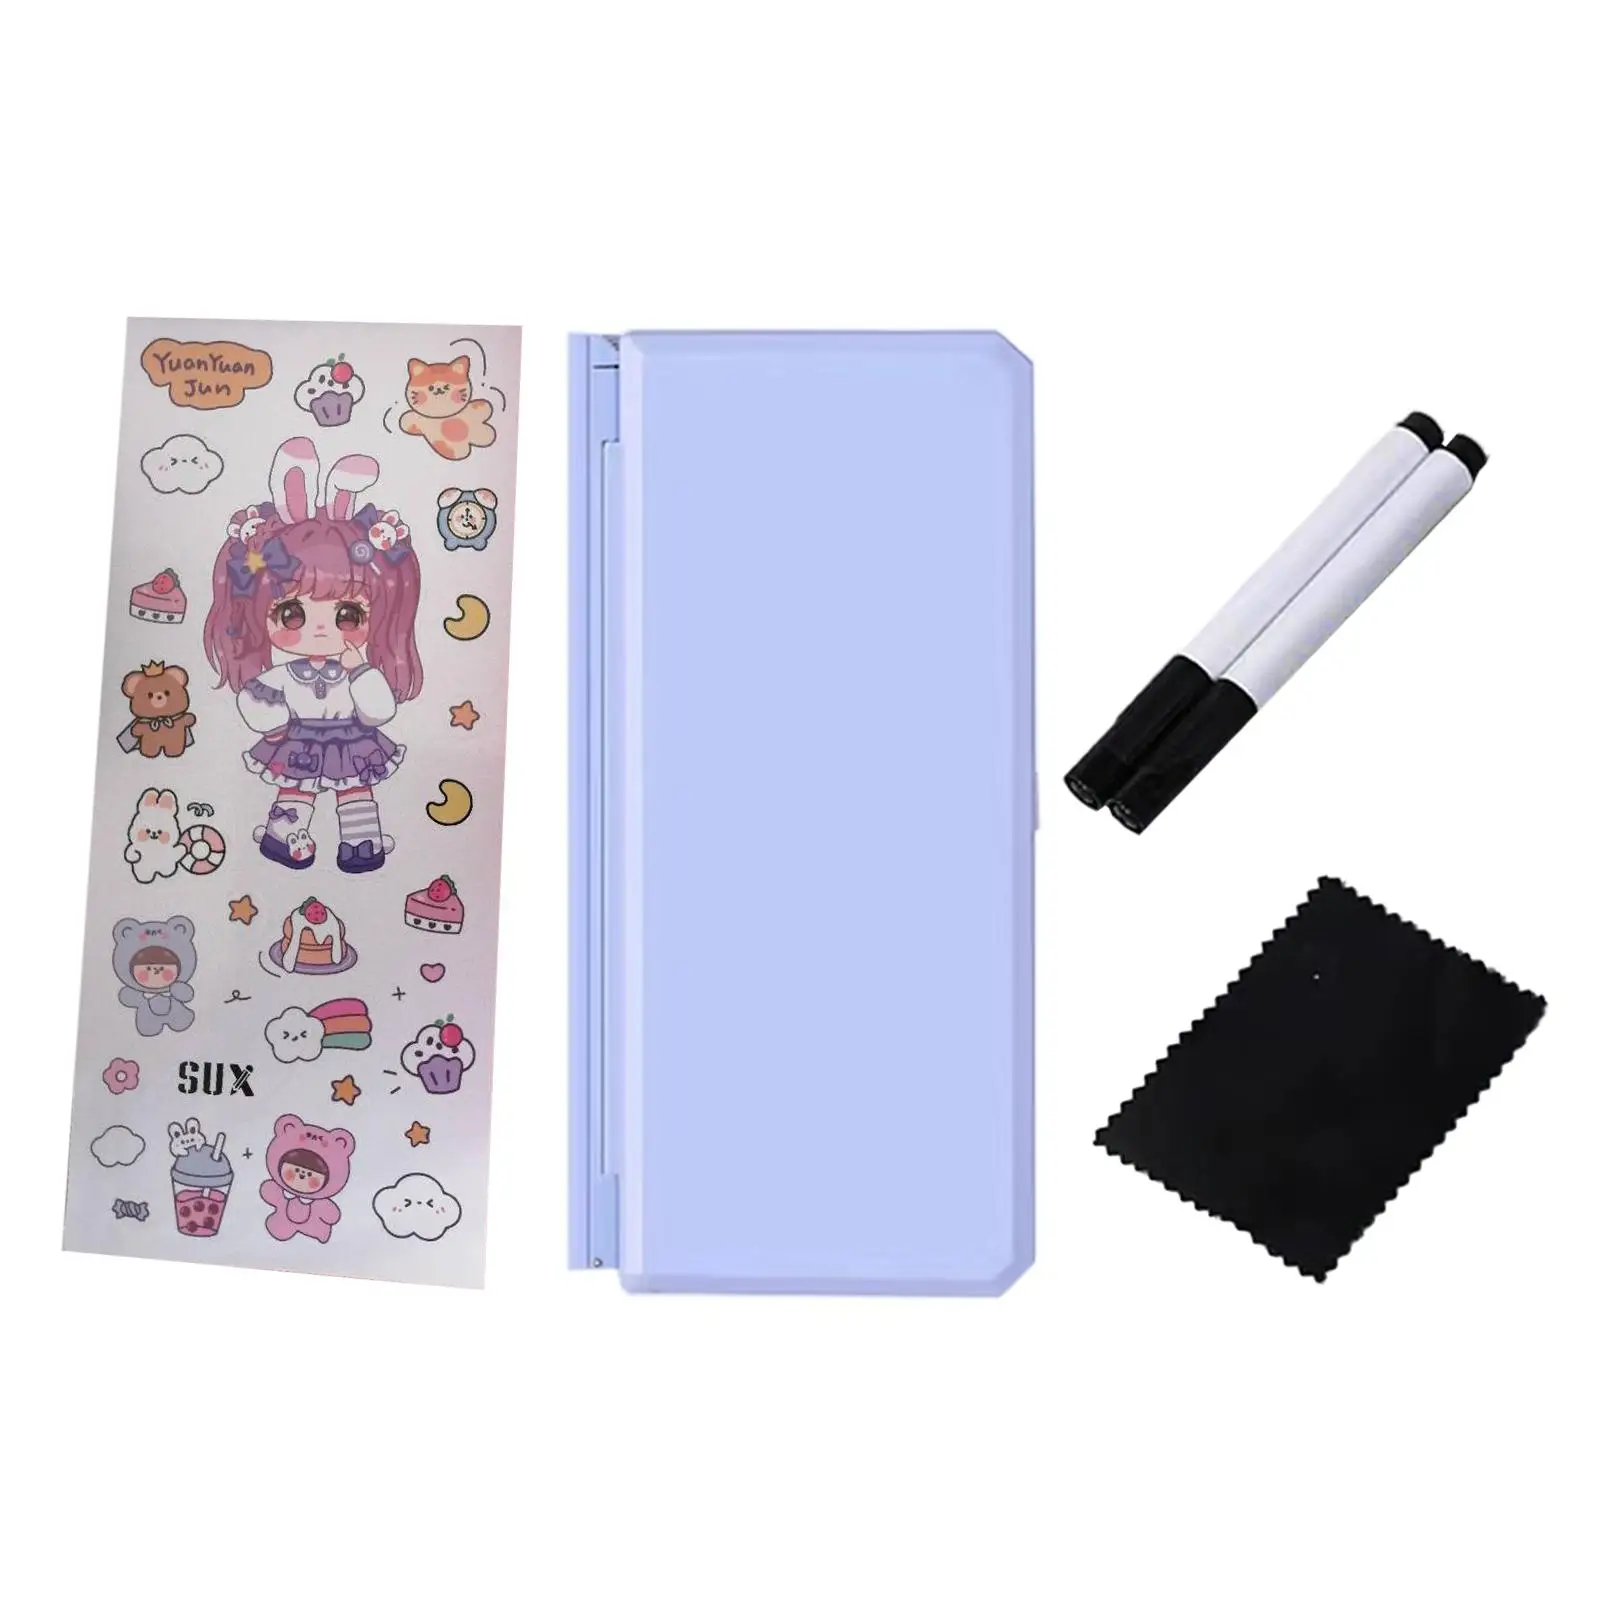 Pencil Case Reading Rack Cute Stationery Organizer Box for Tape Ruler